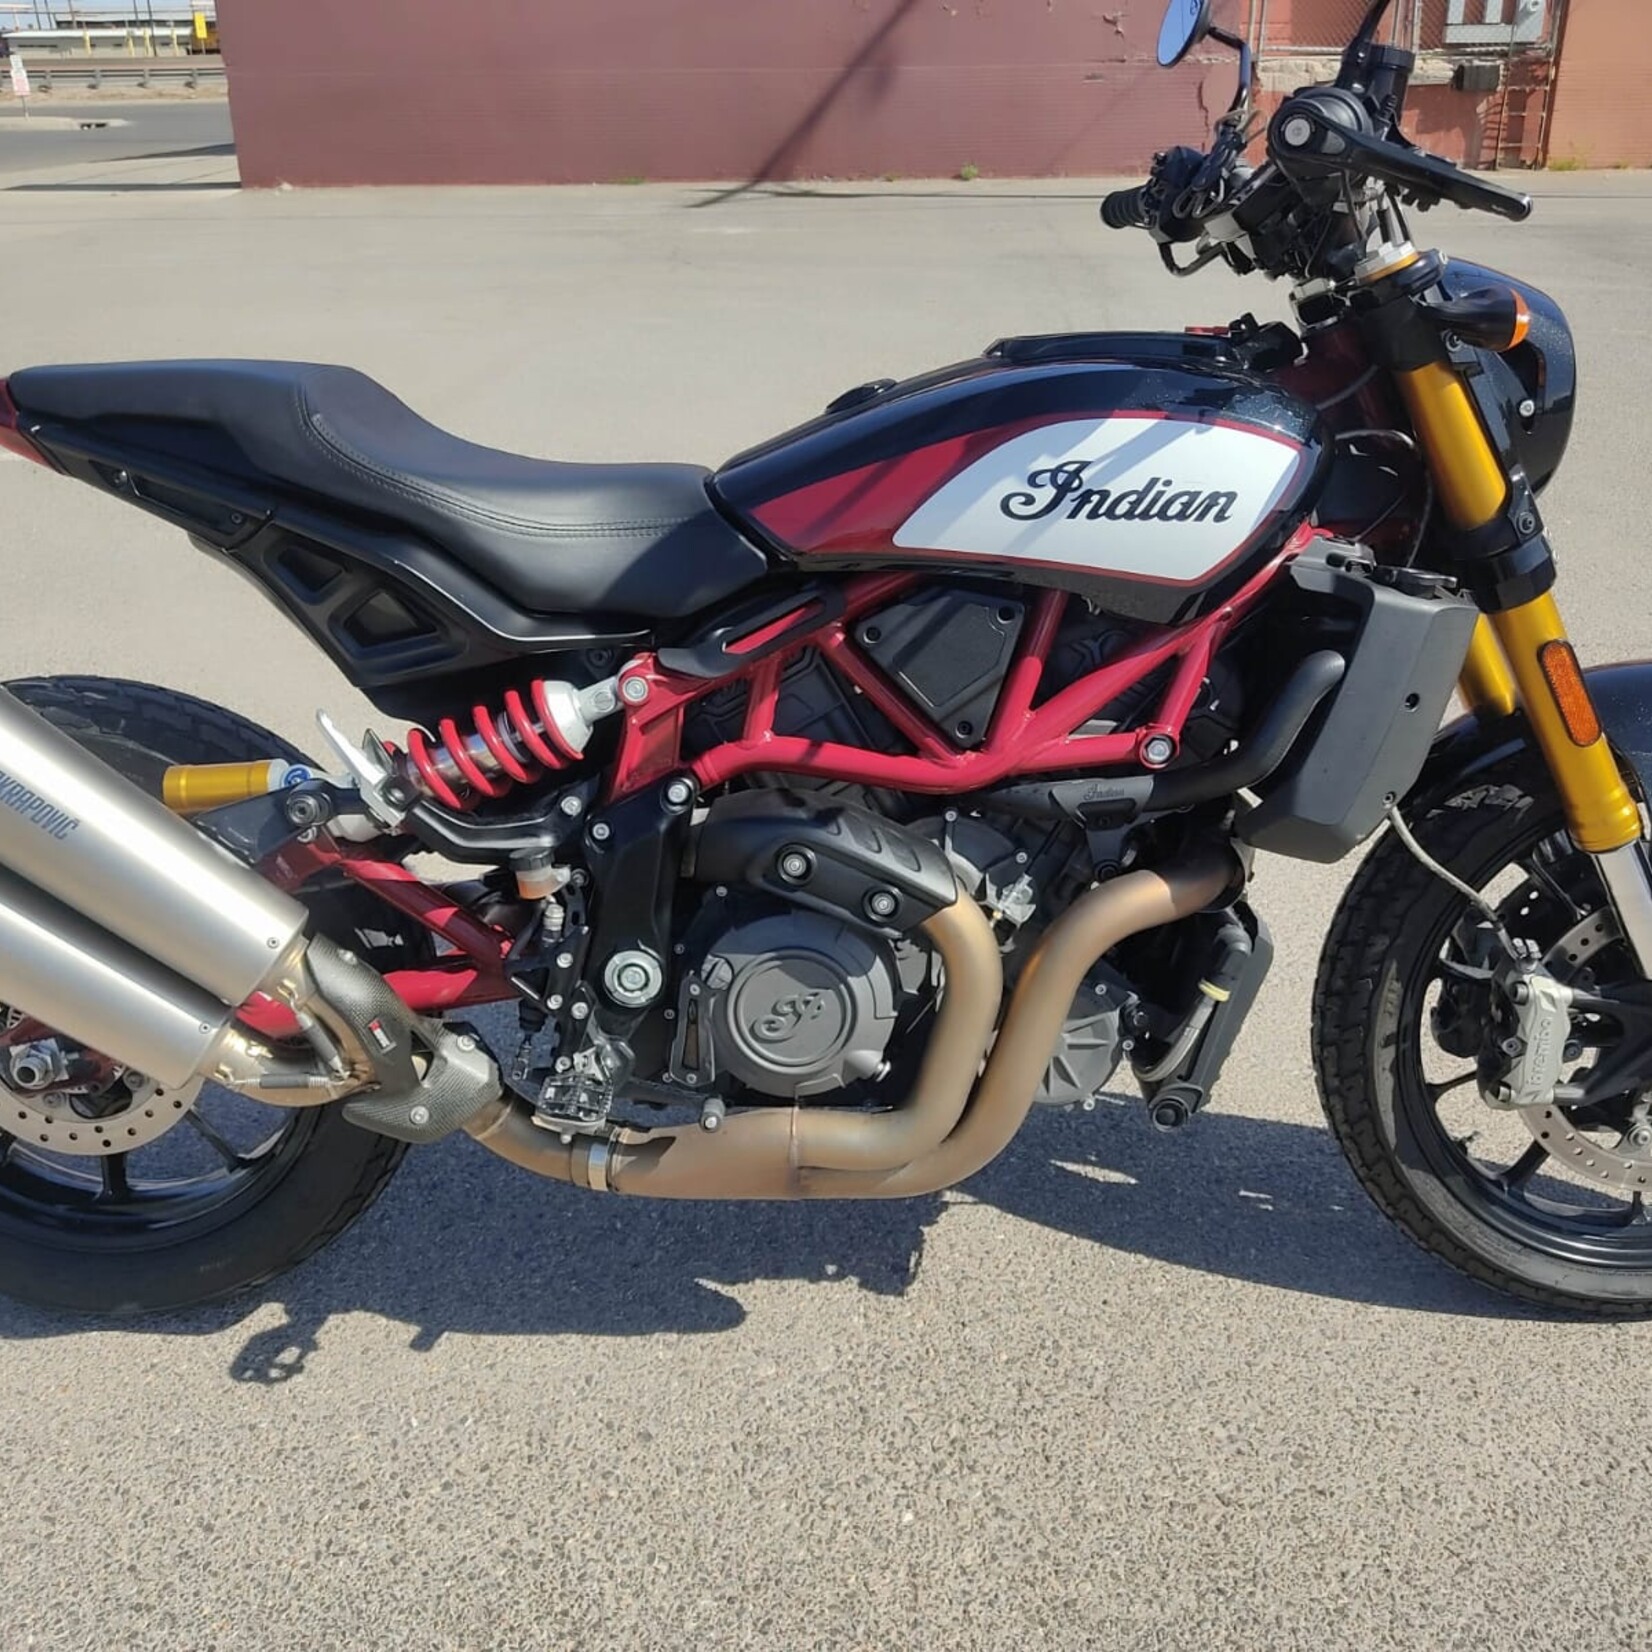 2019 Indian FTR 1200 S Motorcycle For Sale